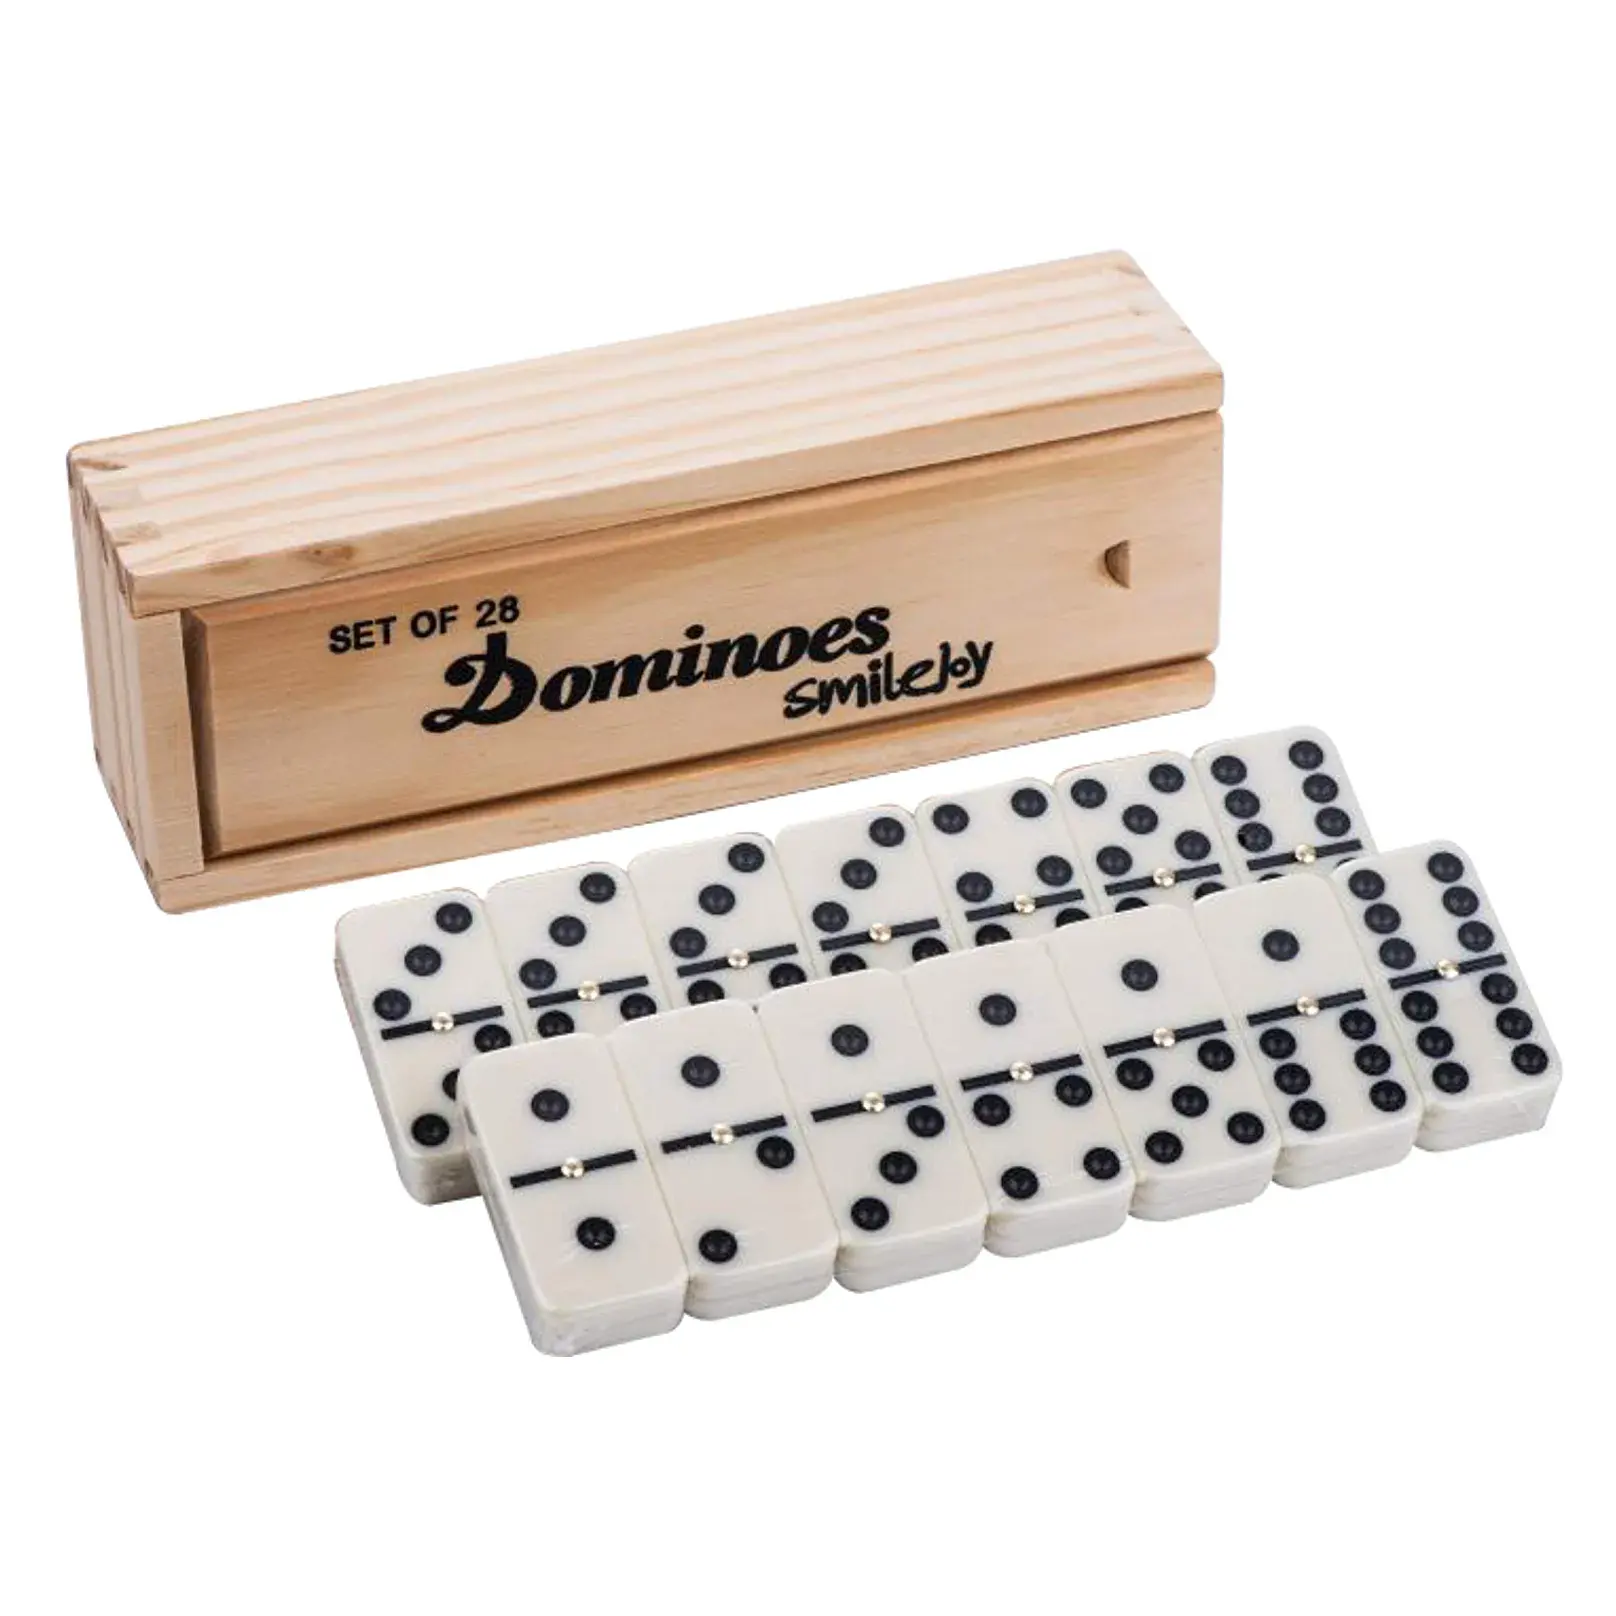 High Quality Domino Game Set 28 Indore Game Custom logo Domino Set With Wooden Box Best Quality Hand Made Domino Game Set